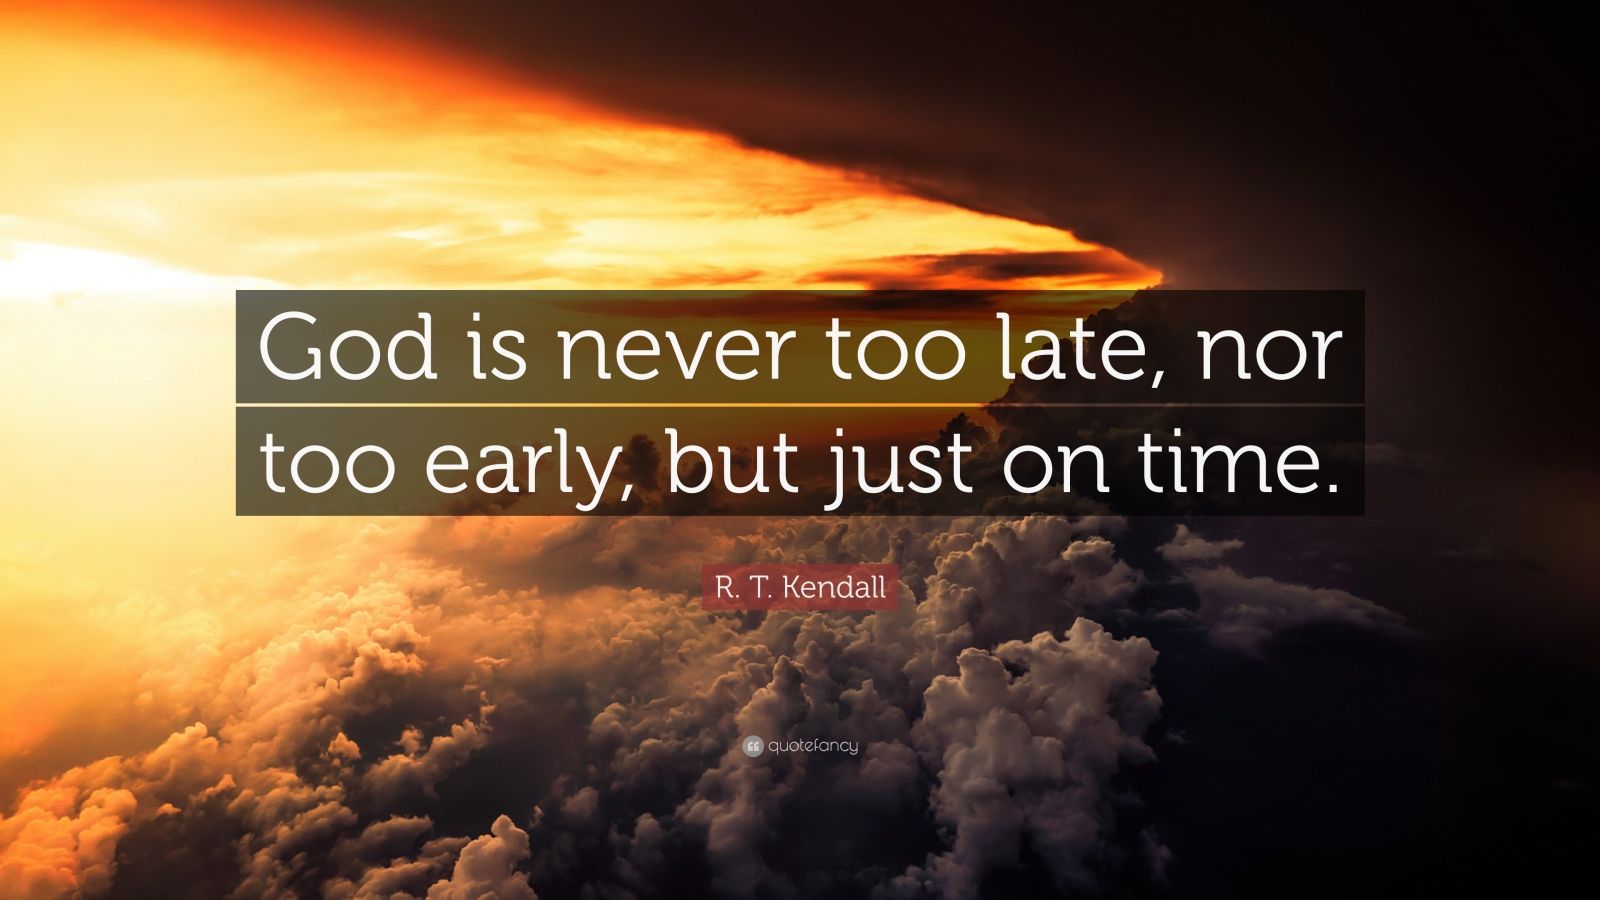 R T Kendall Quote “god Is Never Too Late Nor Too Early But Just On Time ” 12 Wallpapers